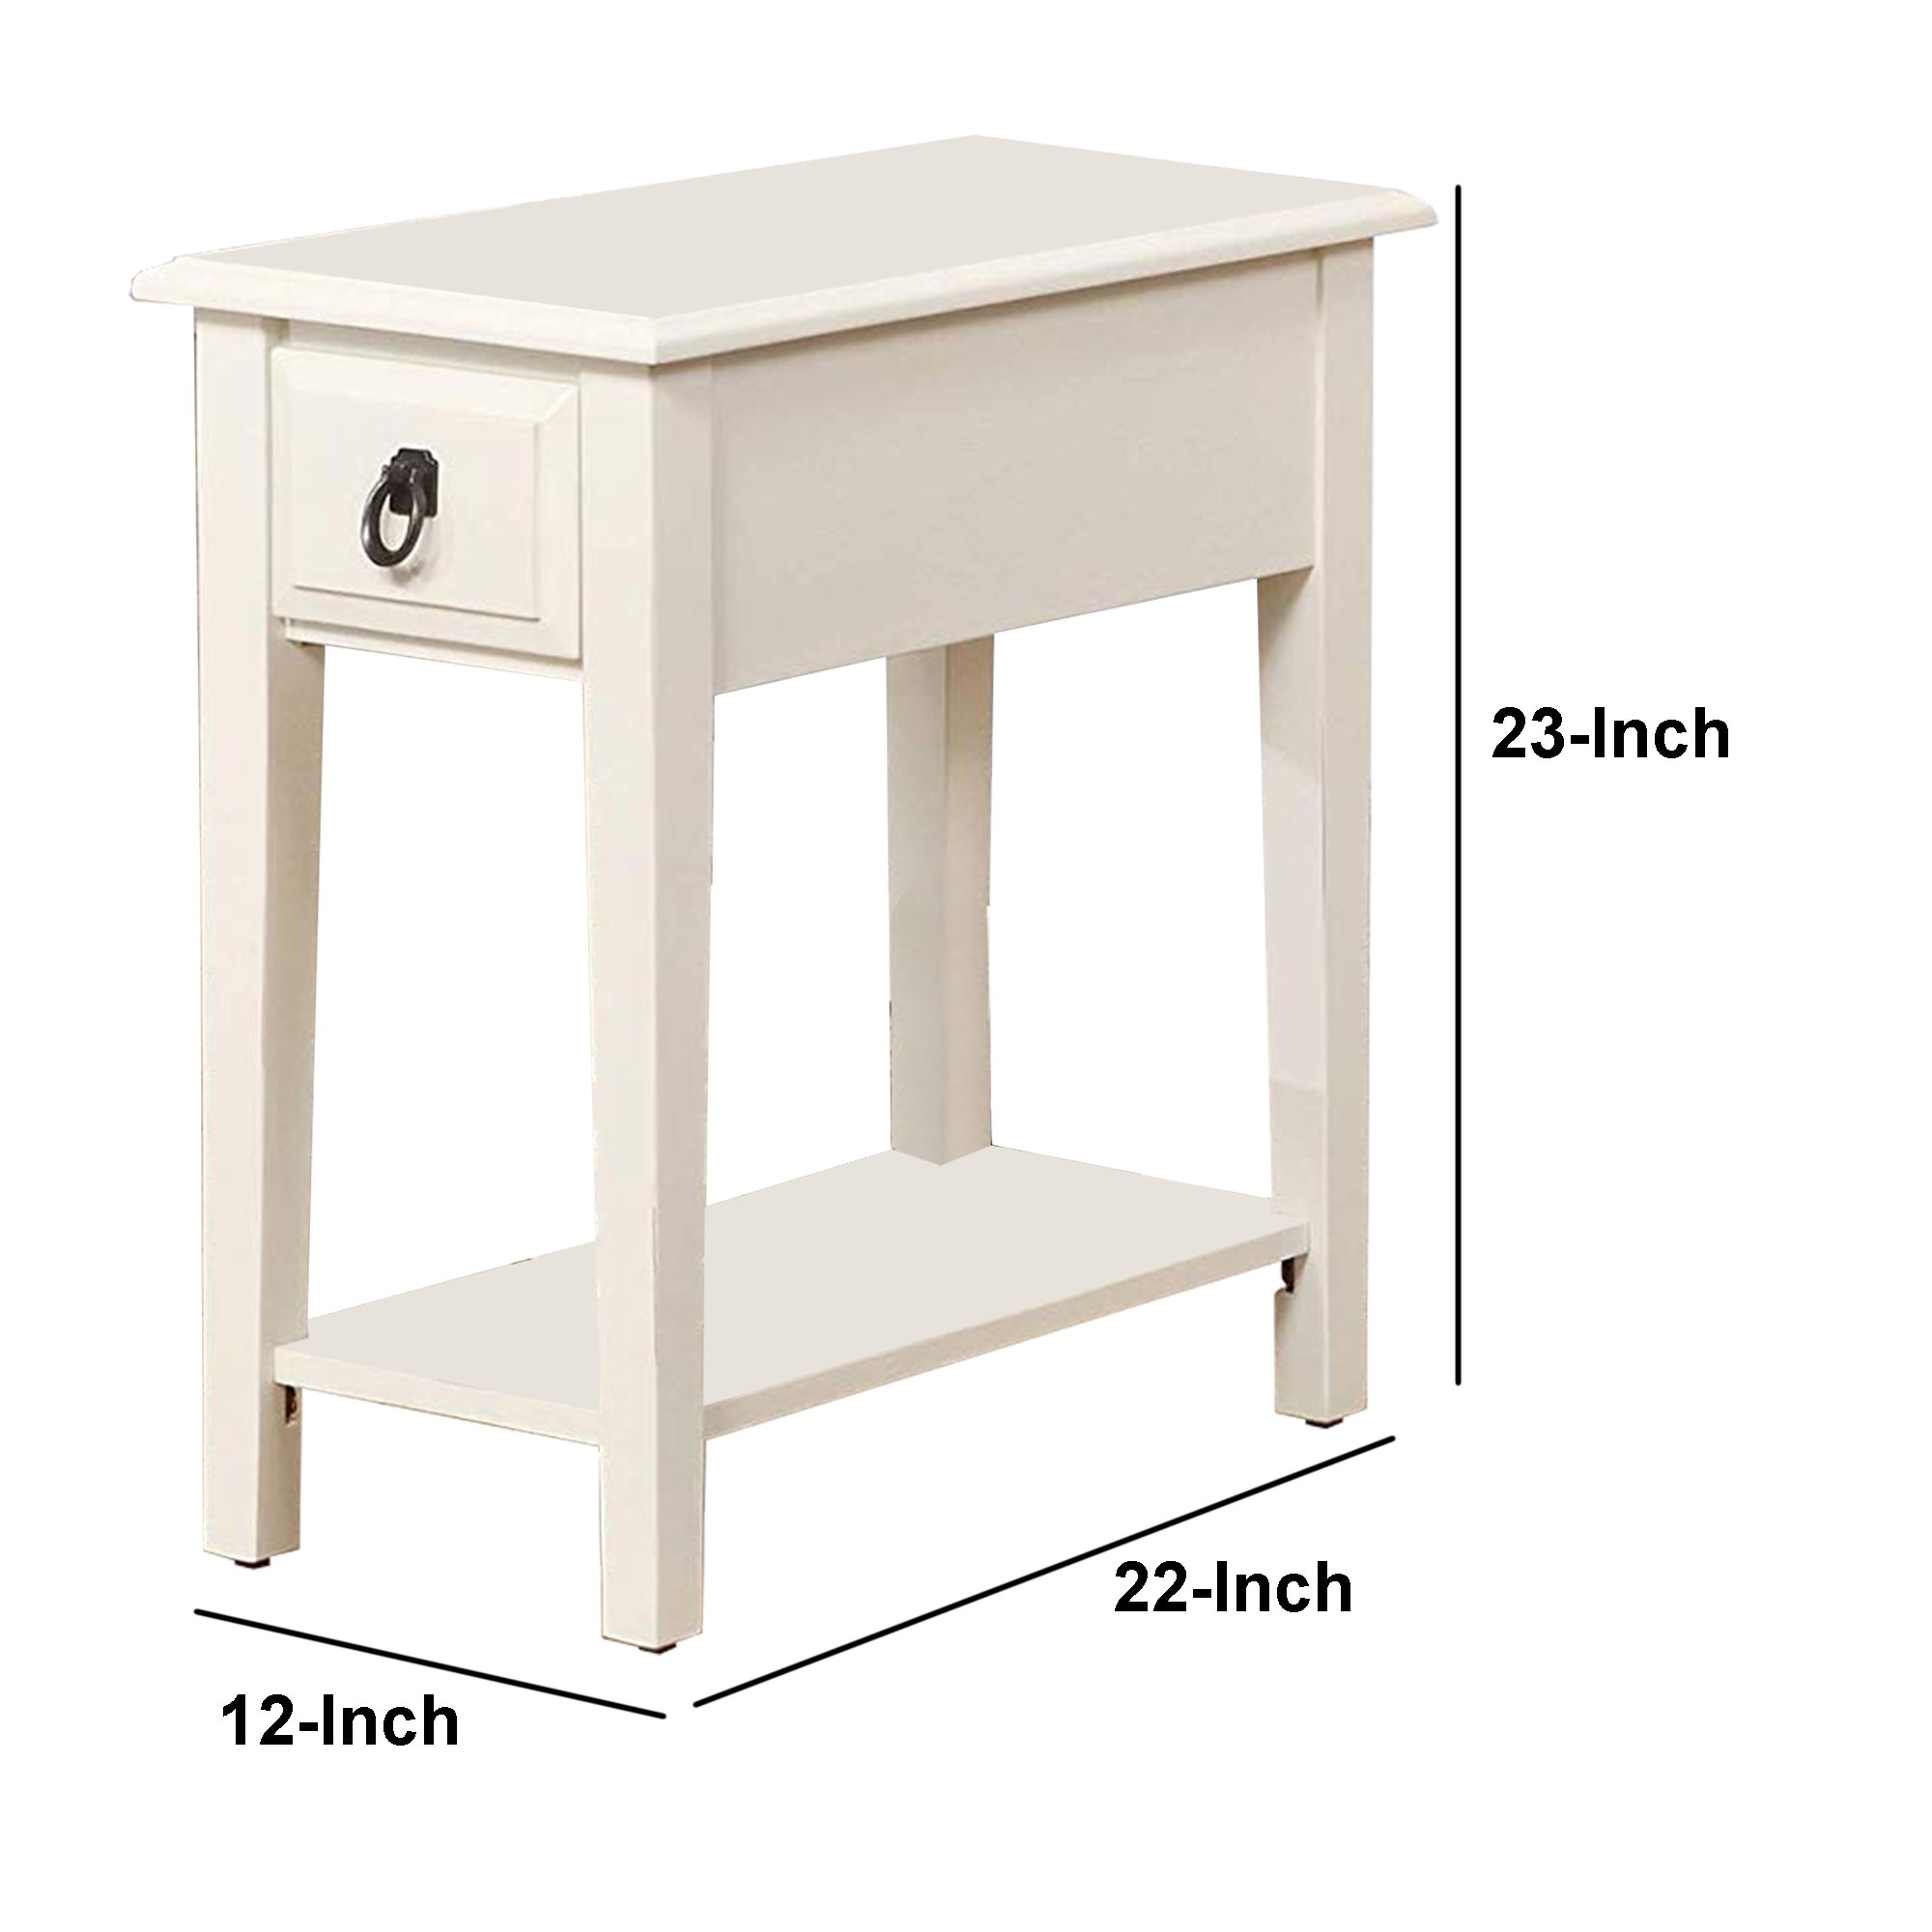 Rectangular Wooden Side Table with 1 Drawer and Open Bottom Shelf, White